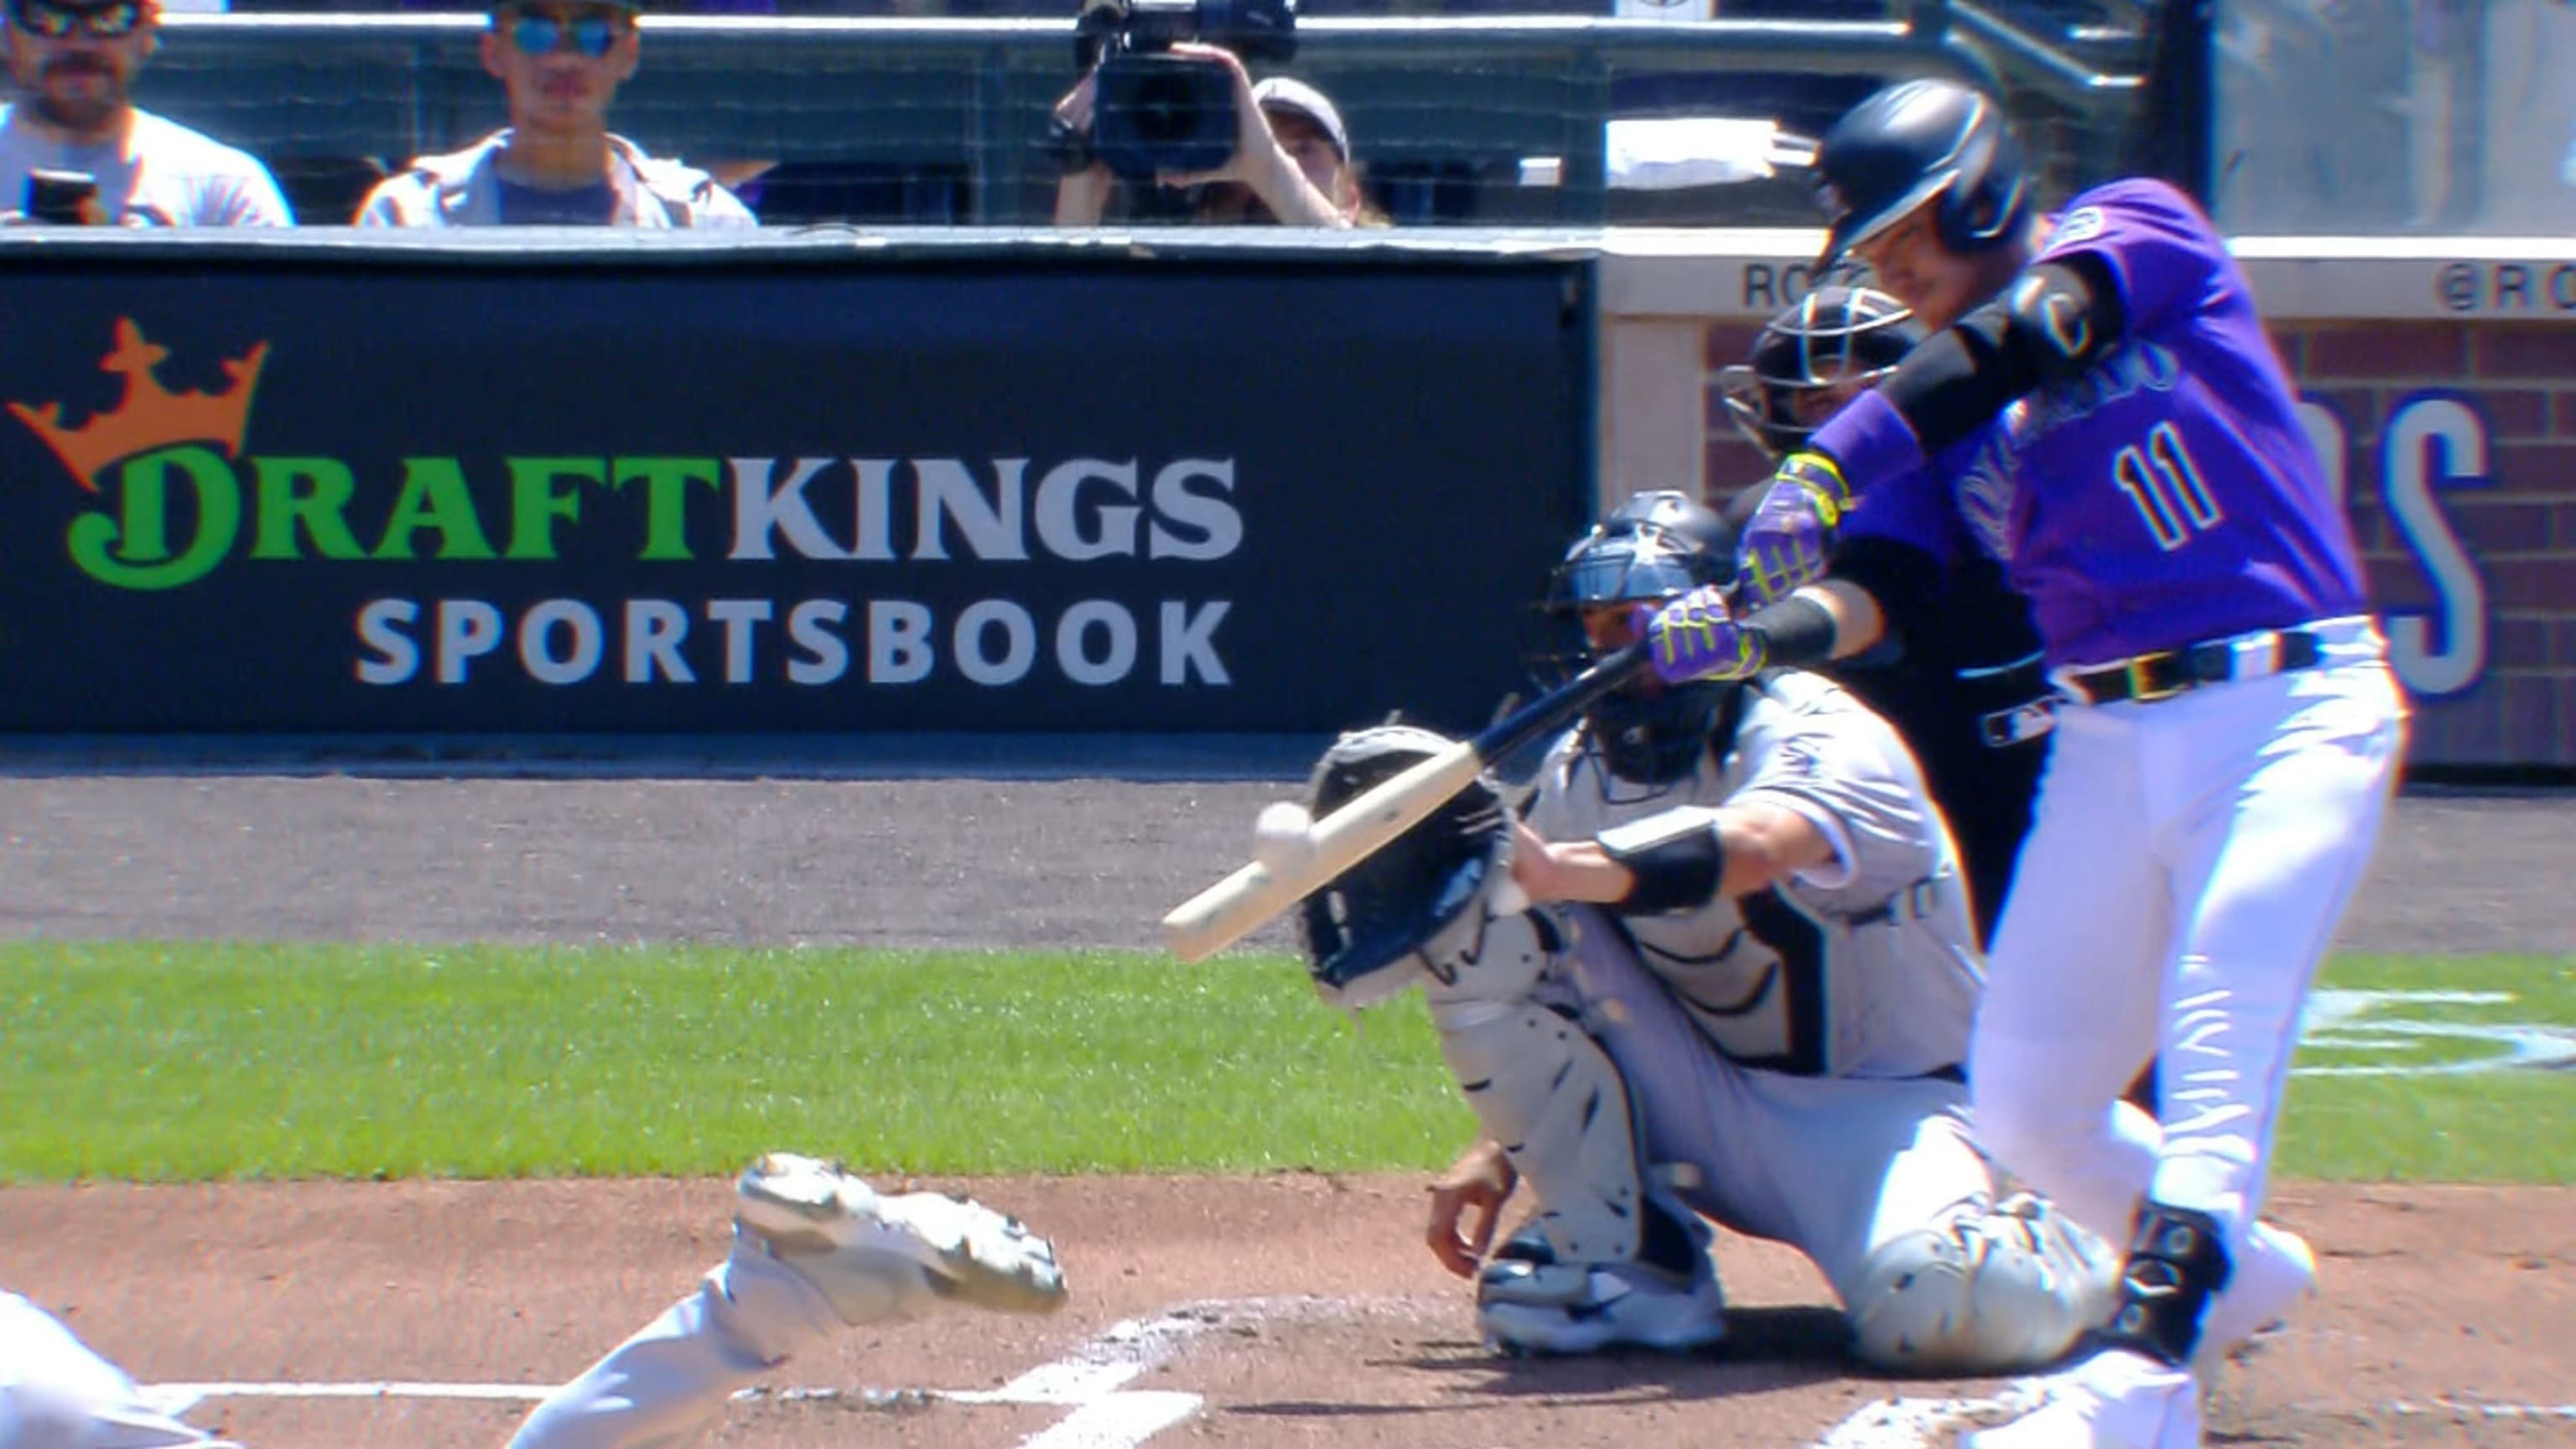 It was for him': Rockies' José Iglesias emotional after first hit since  father's death, Sports